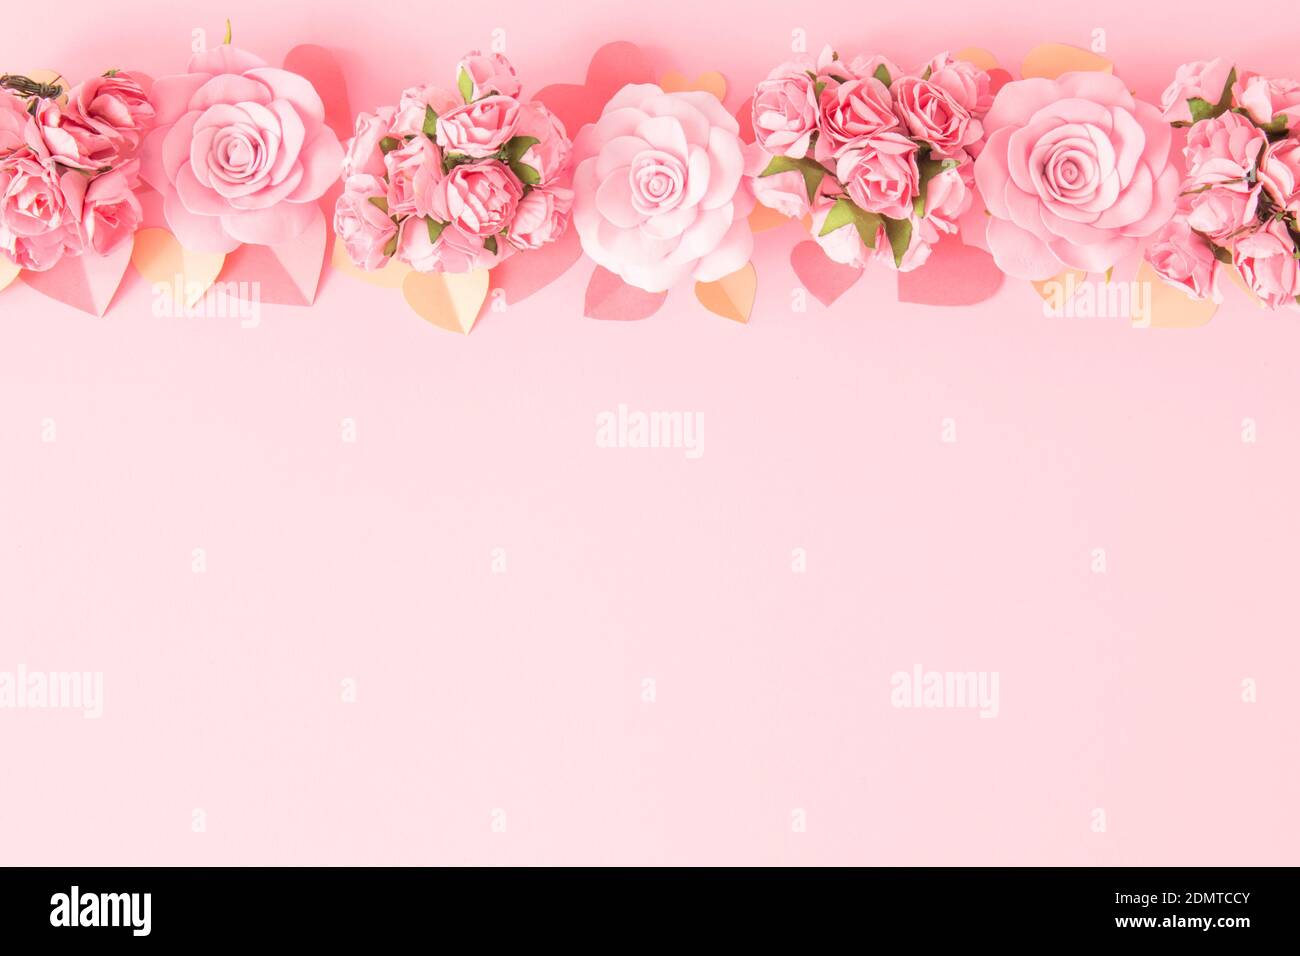 Valentines day background. Border frame of pink flowers and hearts on pink background. Happy Valentine's Day banners. Pastel tone. Copy space. Stock Photo